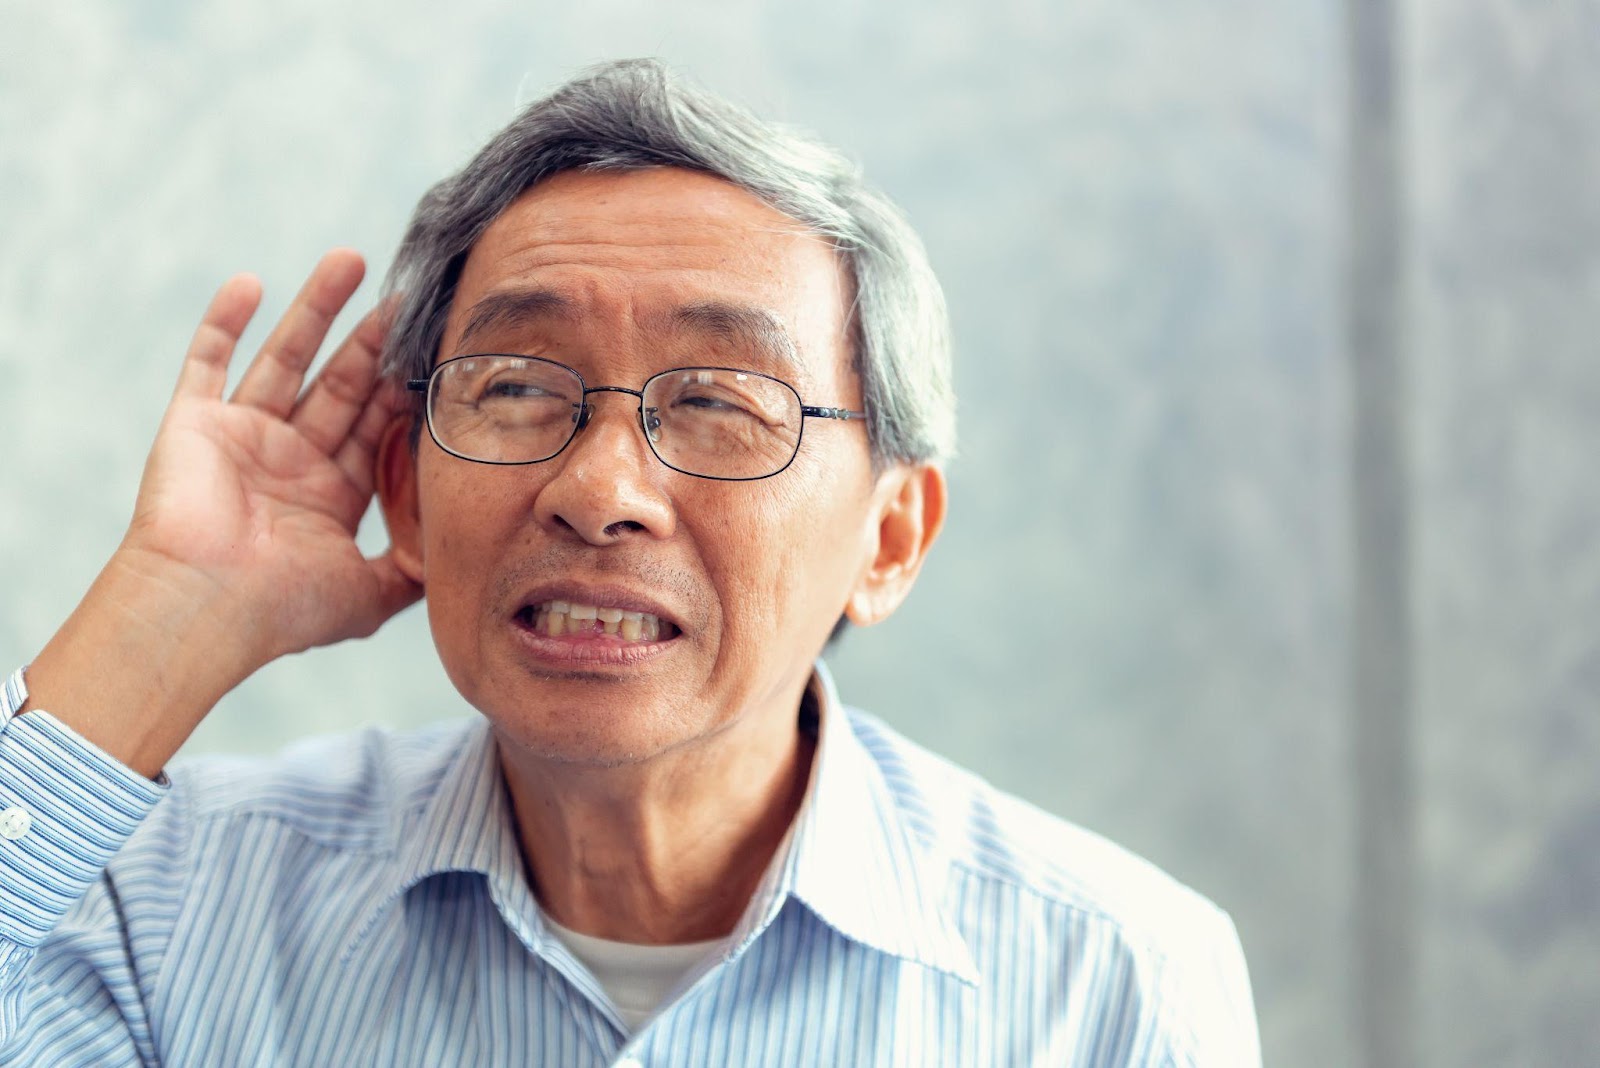 Elderly facing hearing loss cupping his ears trying to head sounds